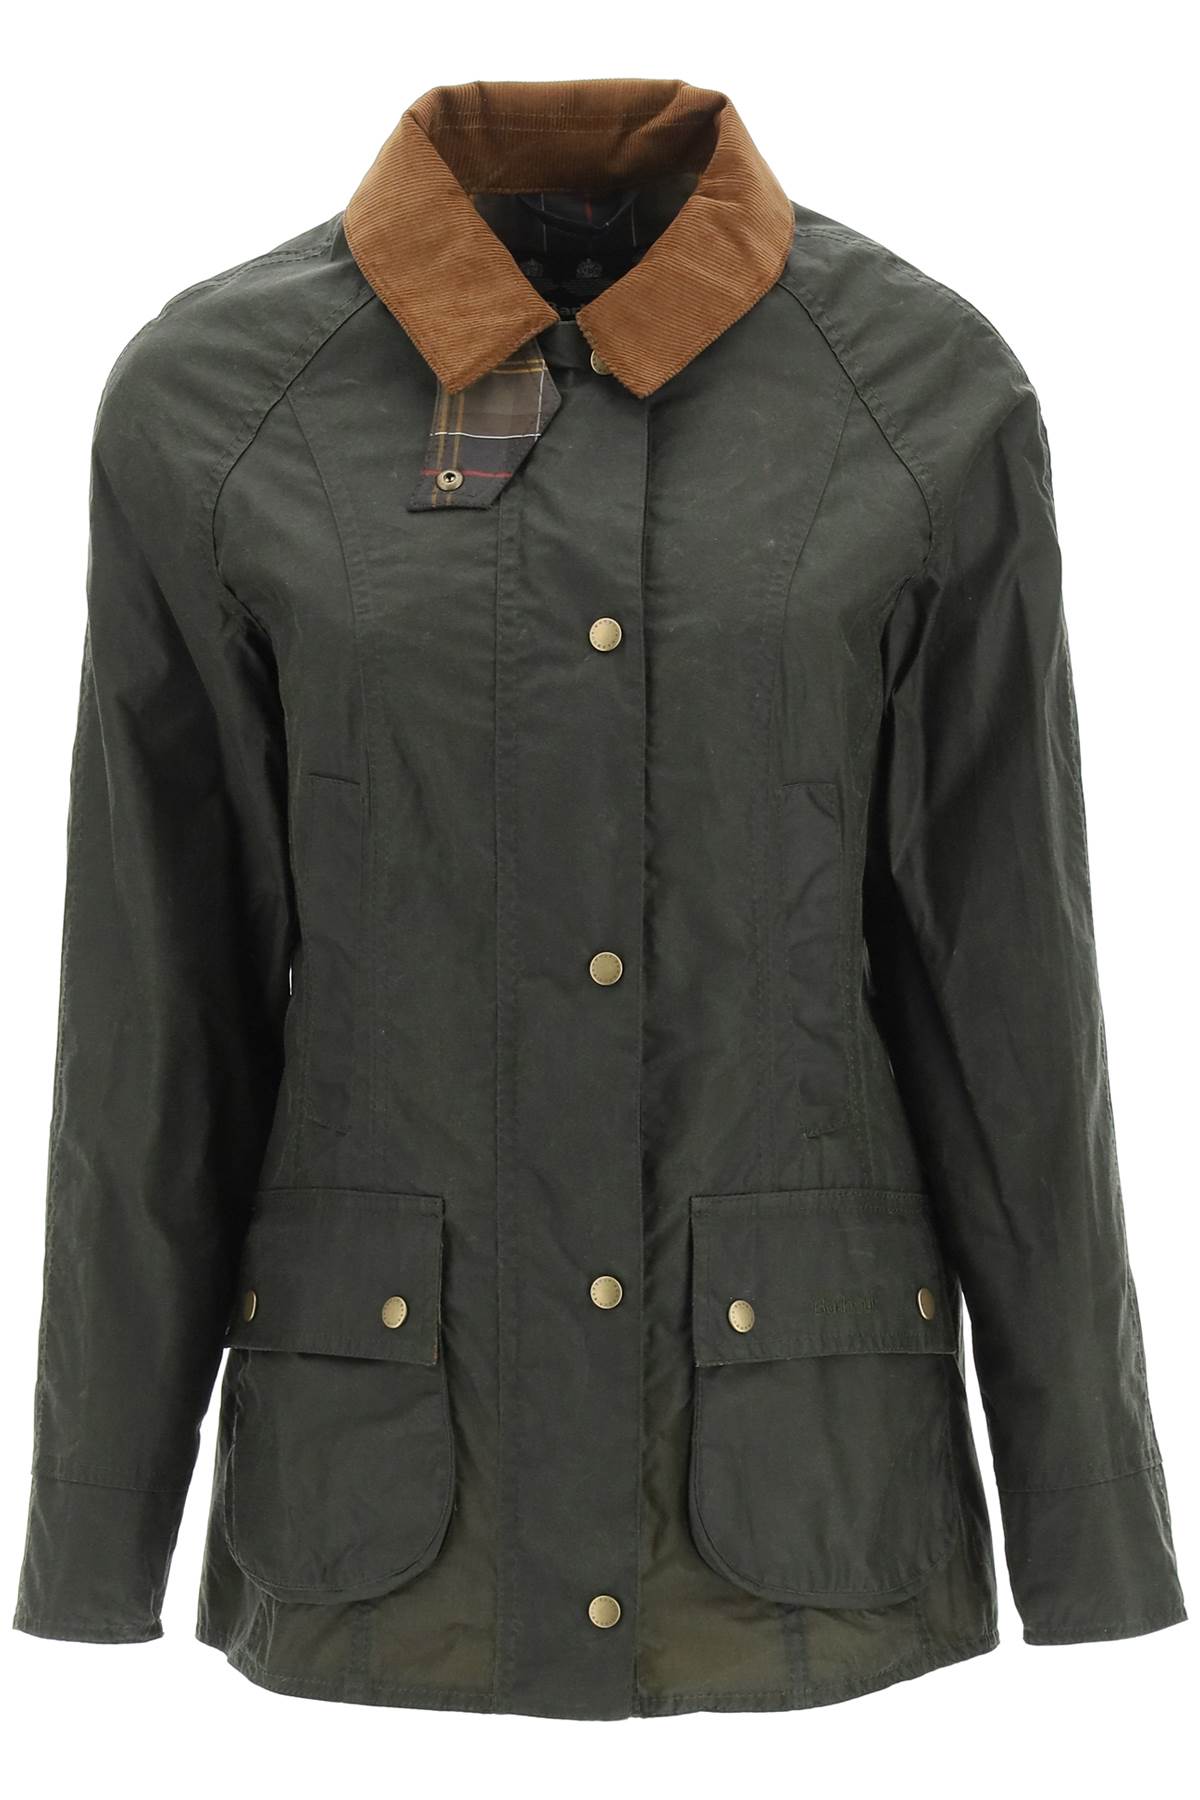 Barbour Beadnell Waxed Jacket